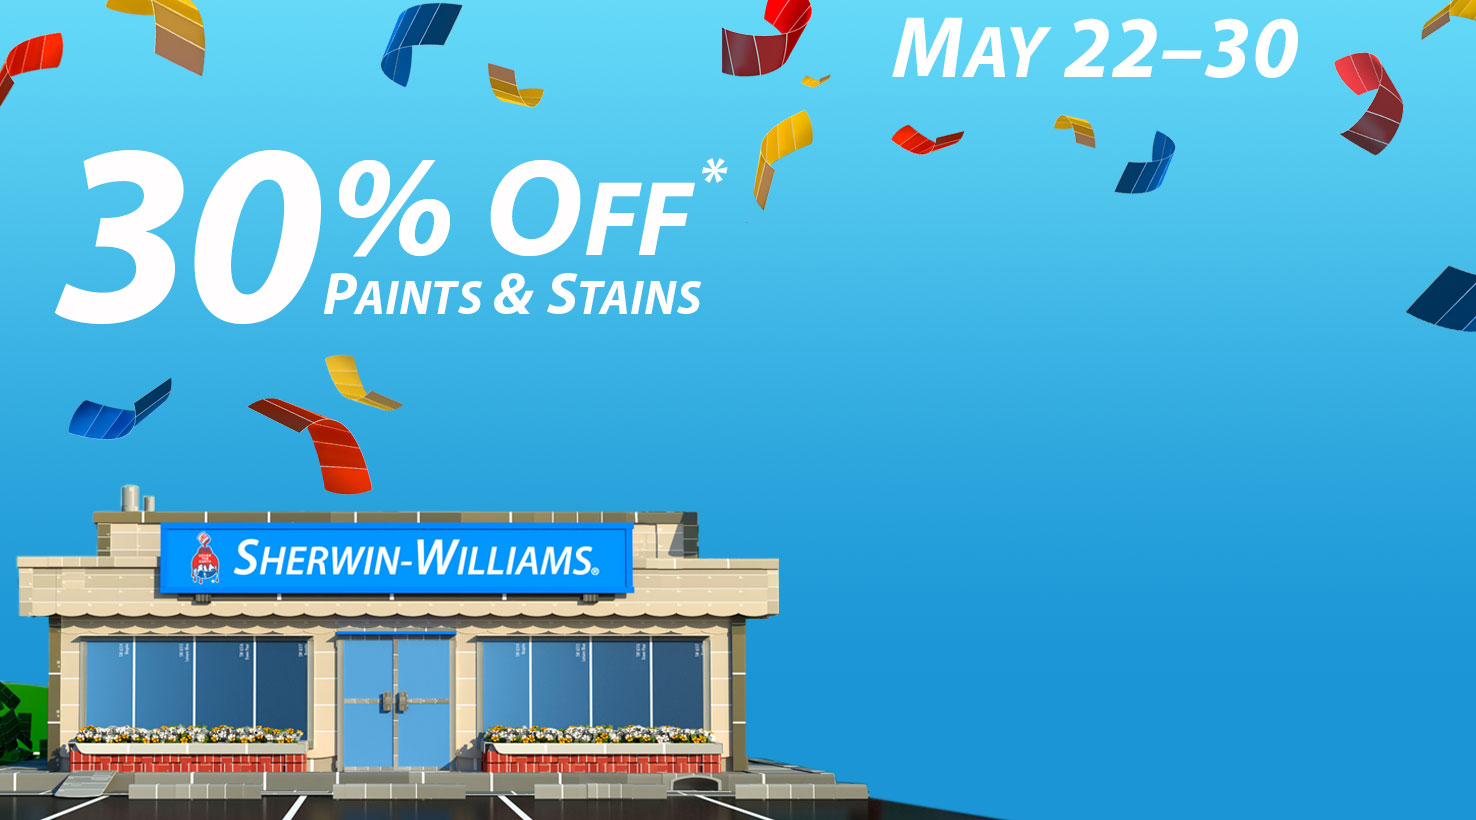 Paint Colors - Exterior & Interior Paint Colors From Sherwin-Williams